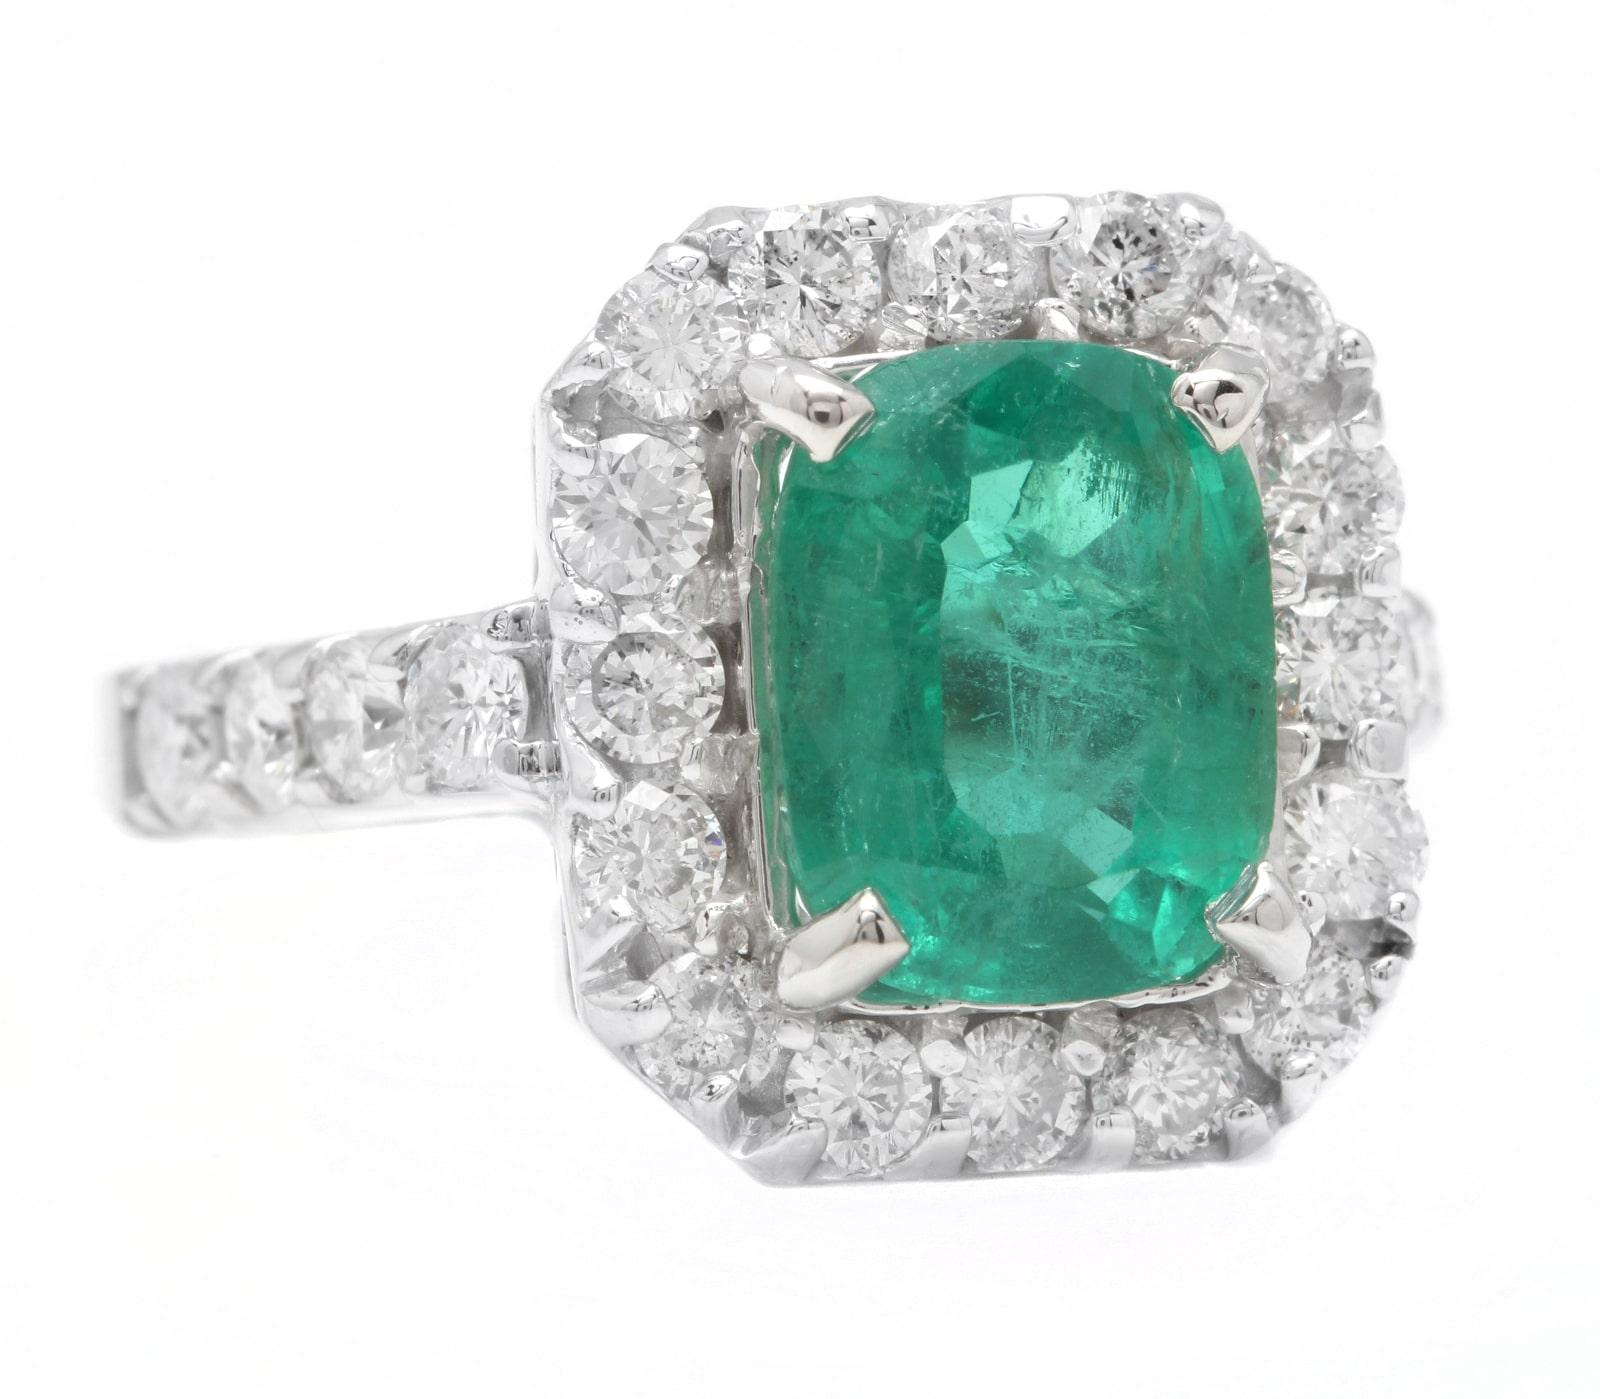 5.50 Carats Natural Emerald and Diamond 14K Solid White Gold Ring

Suggested Replacement Value: Approx. $6,800.00

Total Natural Green Emerald Weight is: Approx. 4.00 Carats (transparent)

Emerald Measures: Approx. 10 x 8mm

Emerald Treatment: